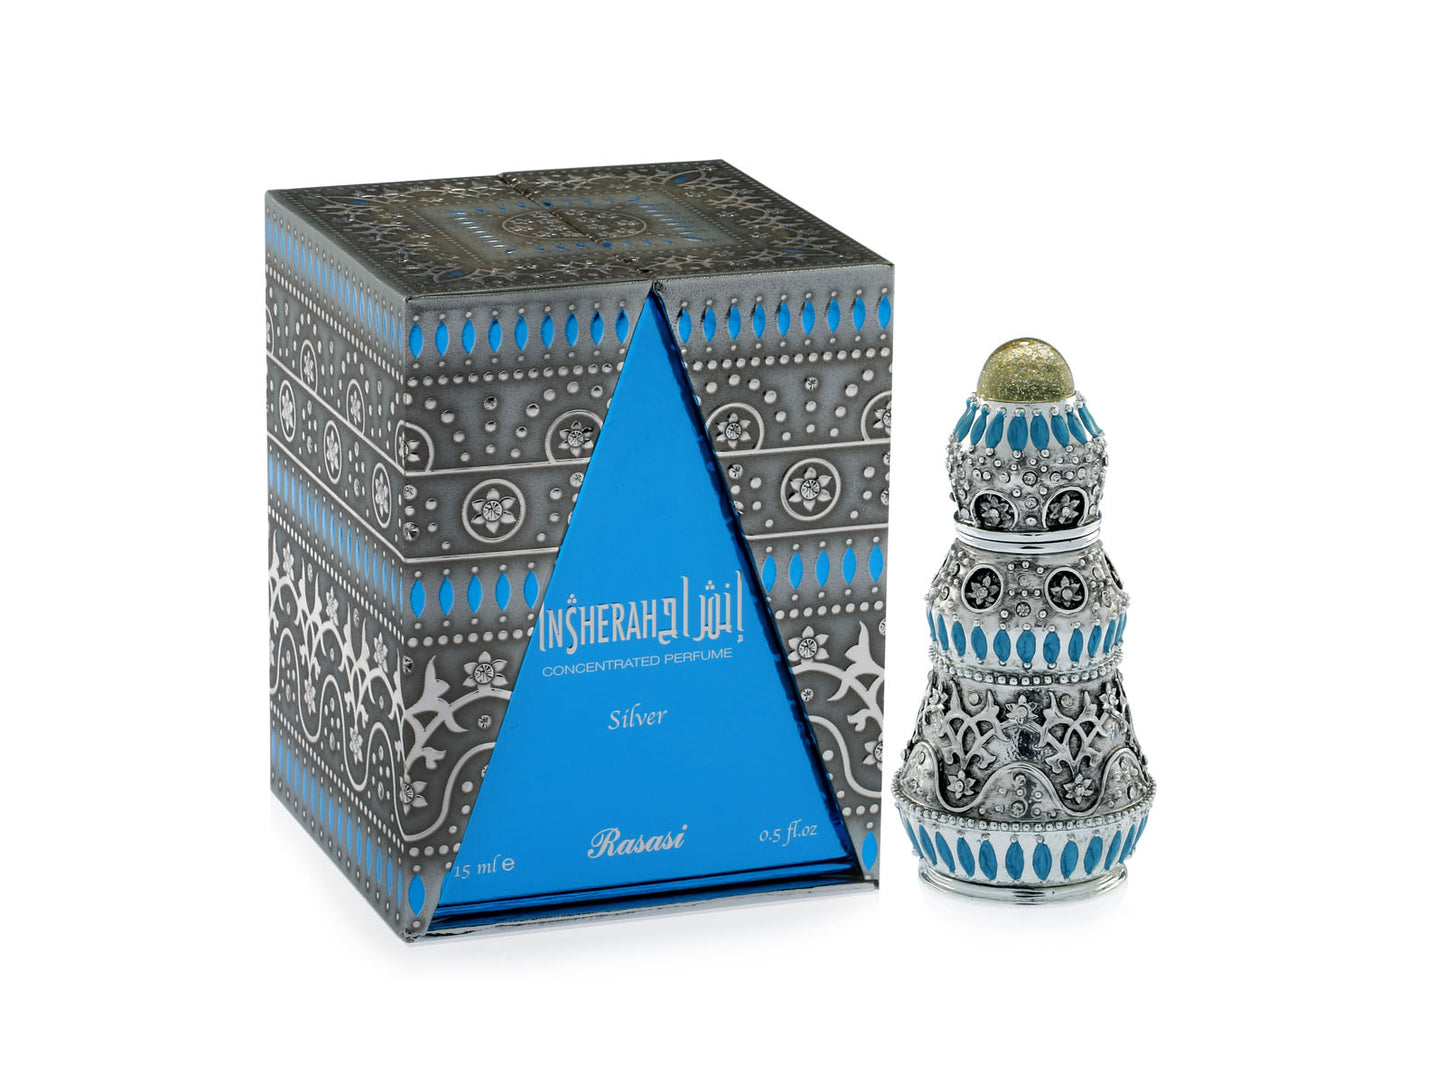 INSHERAH SILVER CONCENTRATED PERFUME - 15ml